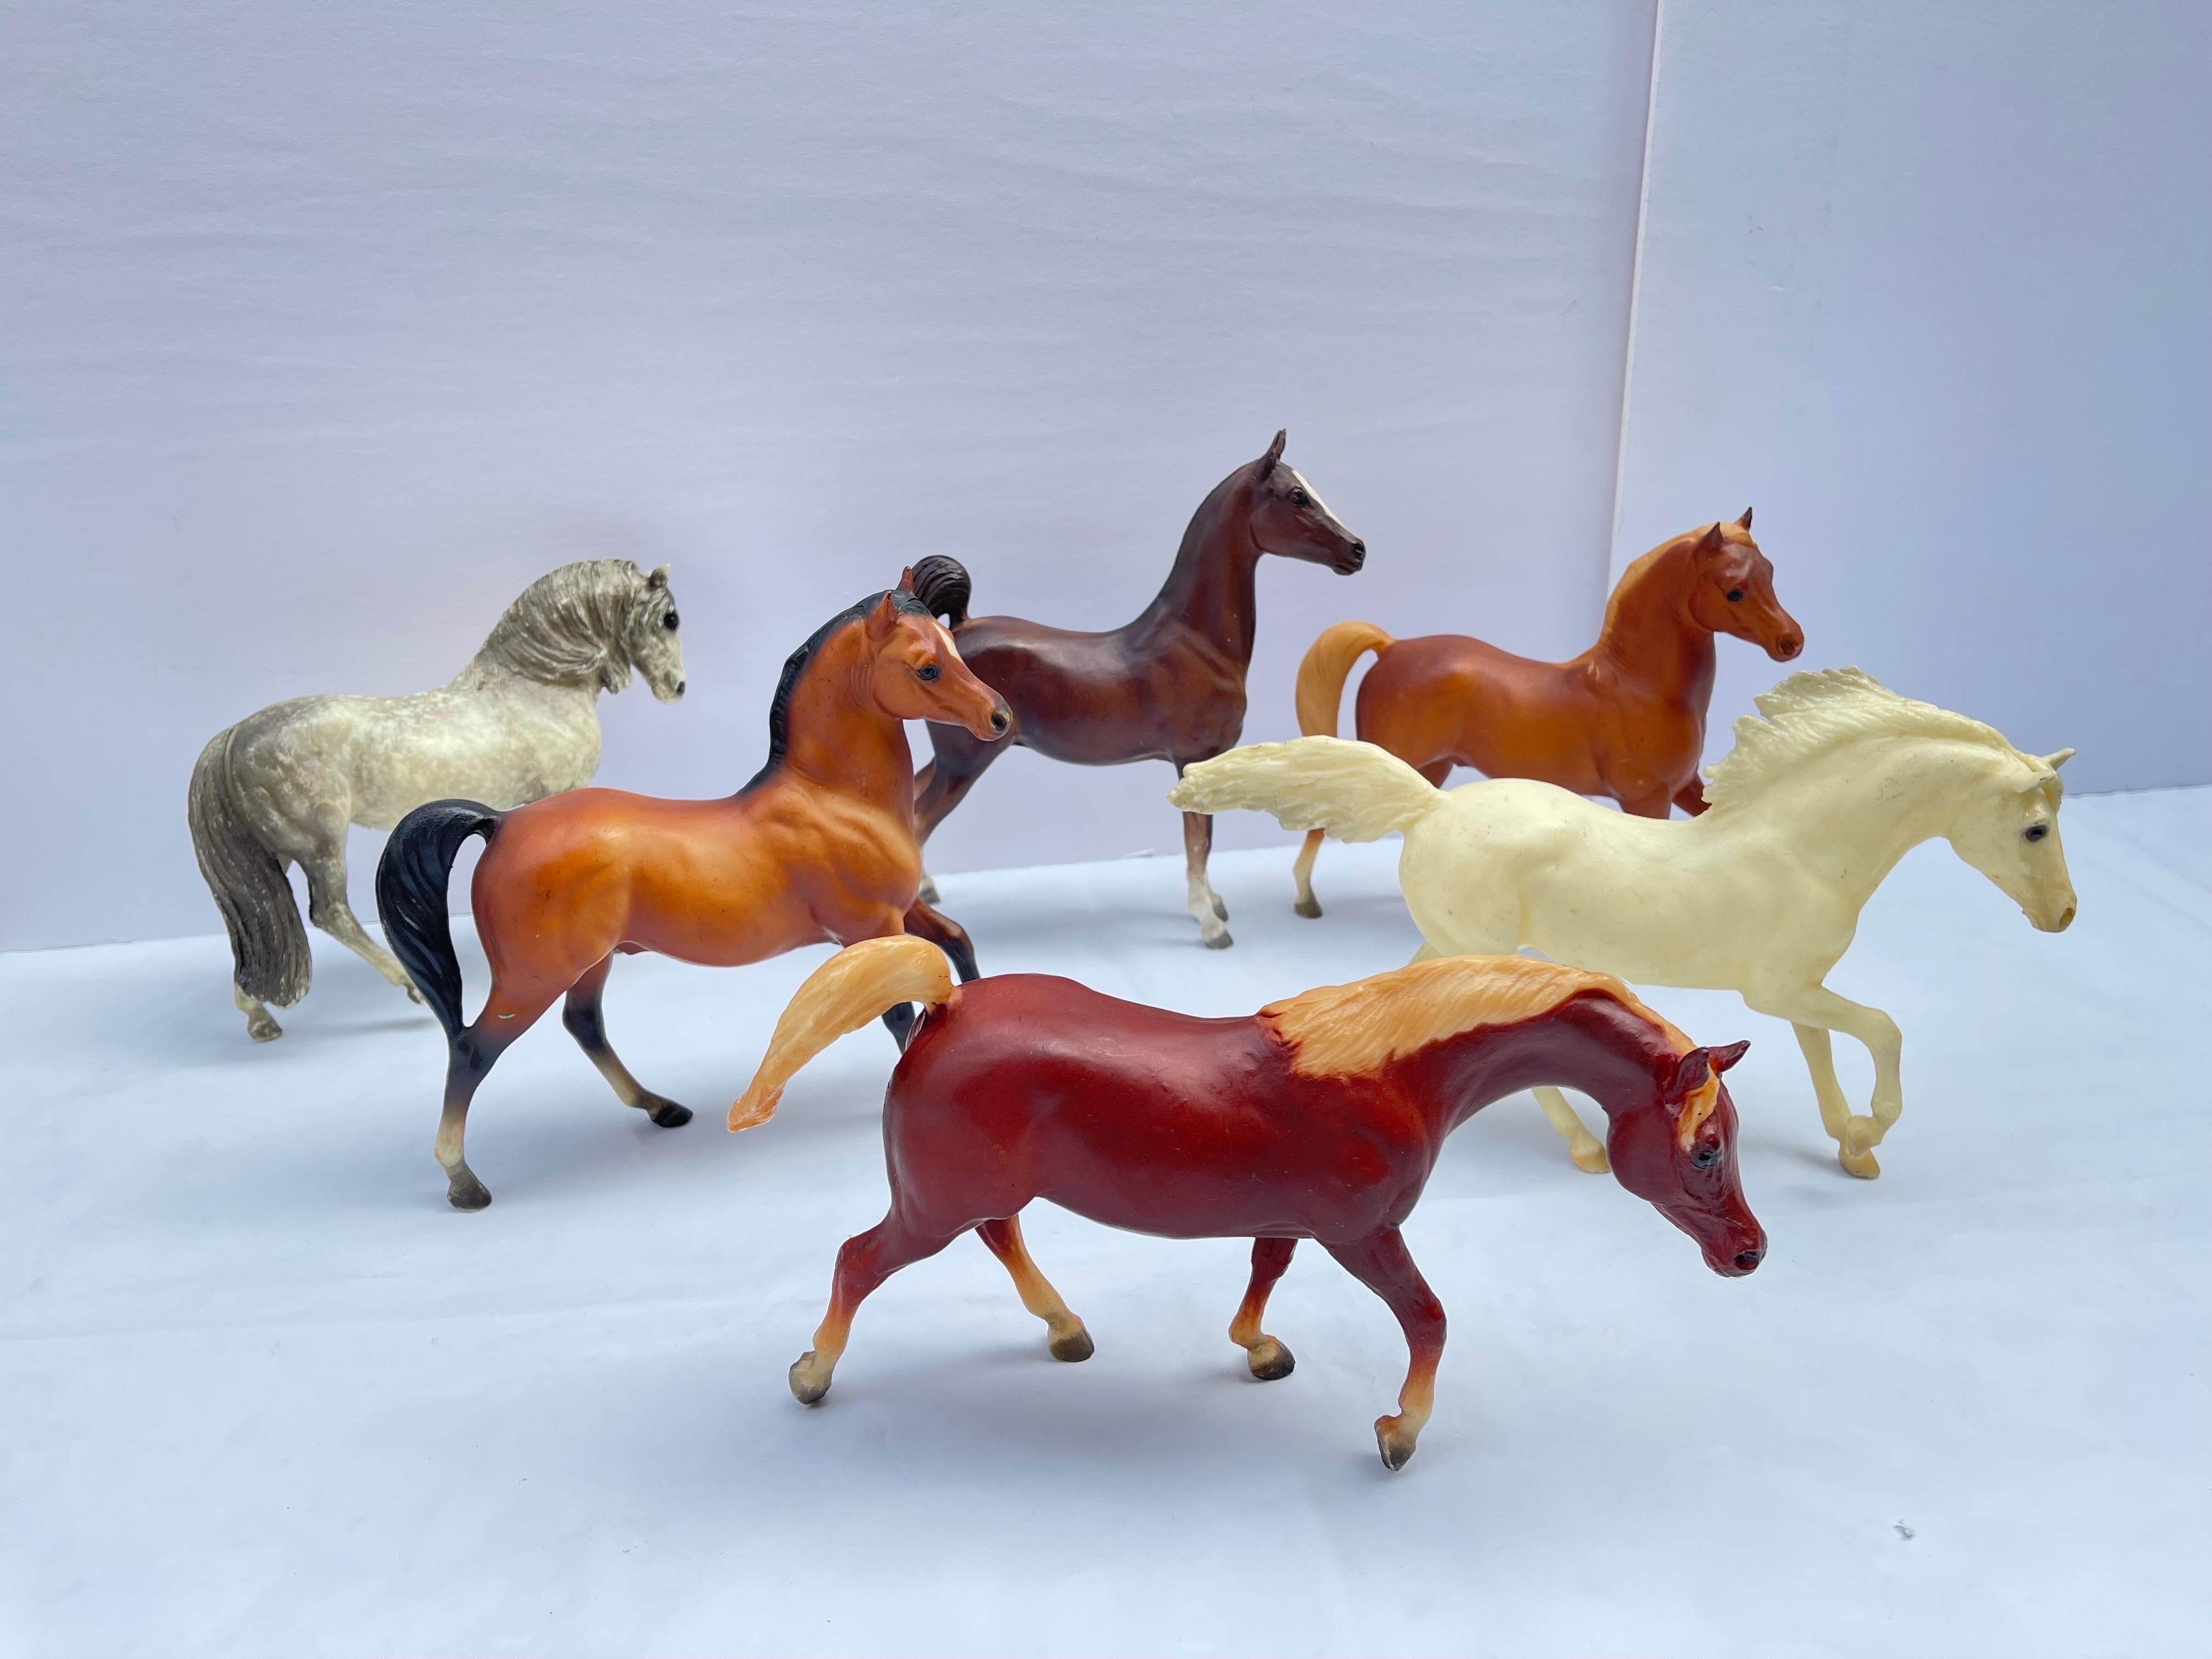 Set of Six Medium Size Vintage Breyer Horses. All Six Breyer horses are stamped . The set consists of four brown toned horses and two whiter toned horses, one having appaloosa spots. Sizes vary by inches. Not all are exactly the same dimension.